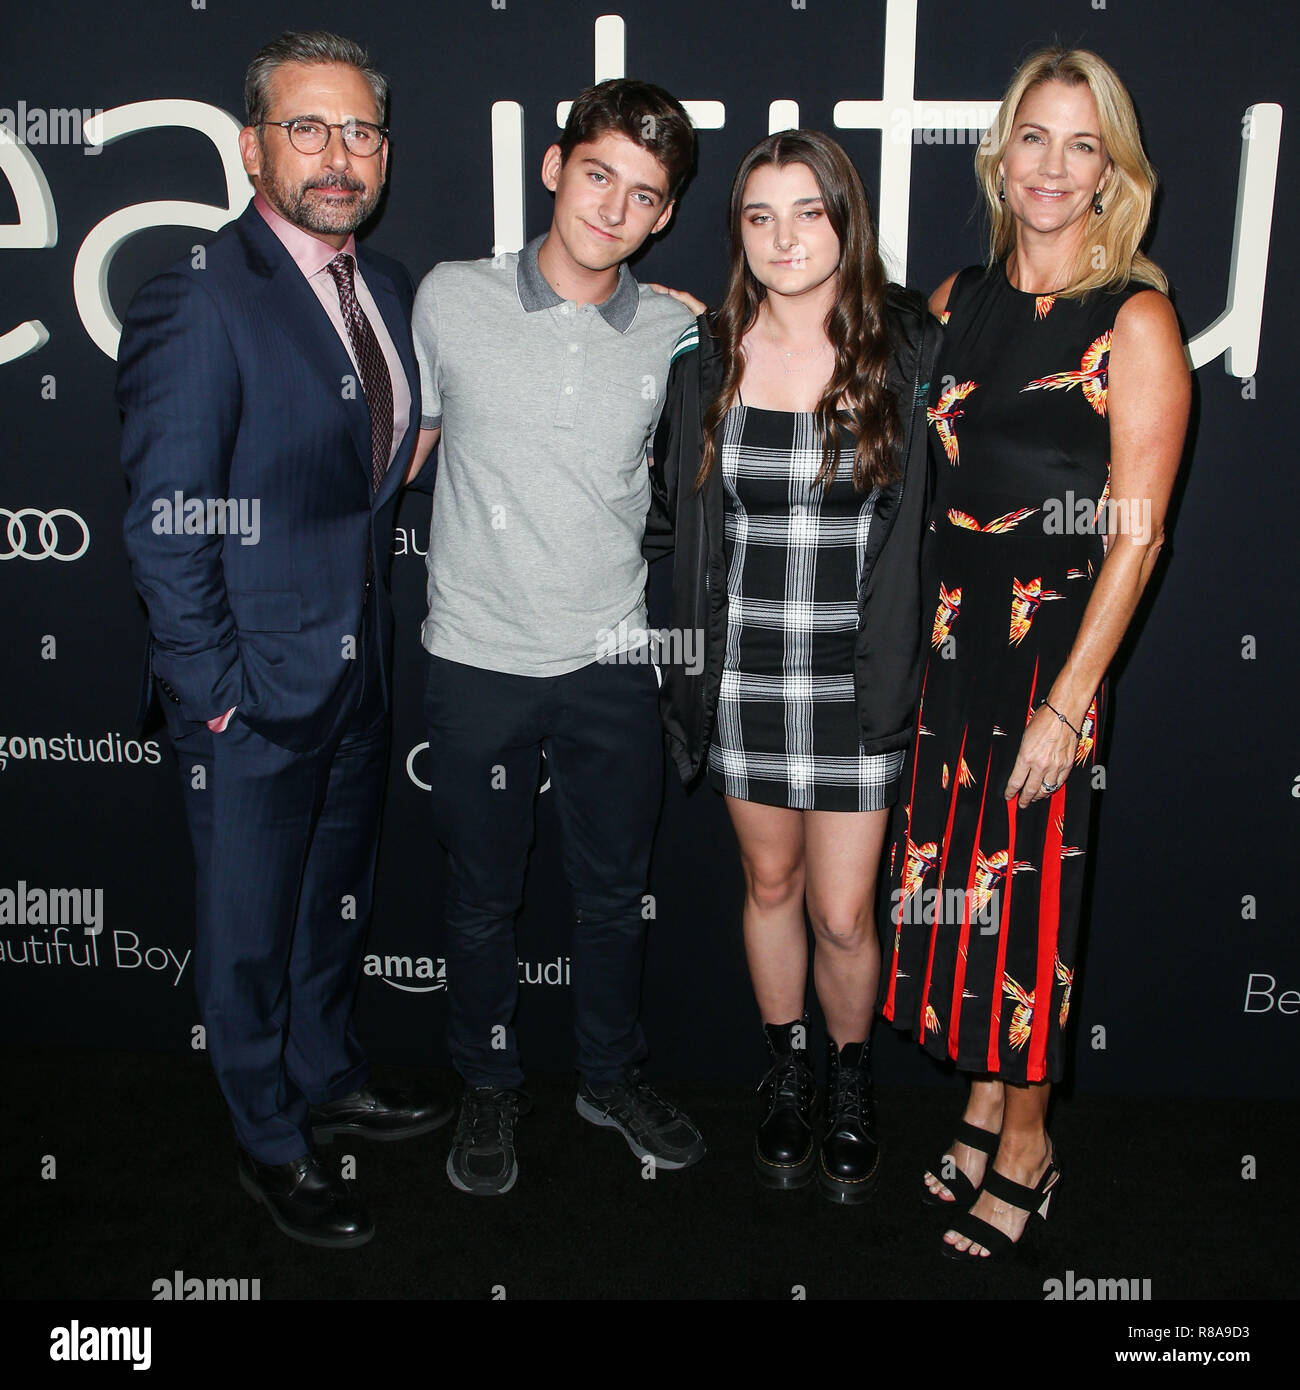 BEVERLY HILLS, LOS ANGELES, CA, USA - OCTOBER 08: Steve Carell, John Carell, Elisabeth Anne Carell, Nancy Carell at the Los Angeles Premiere Of Amazon Studios' 'Beautiful Boy' held at the Samuel Goldwyn Theater at The Academy of Motion Picture Arts and Sciences on October 8, 2018 in Beverly Hills, Los Angeles, California, United States. (Photo by Image Press Agency) Stock Photo